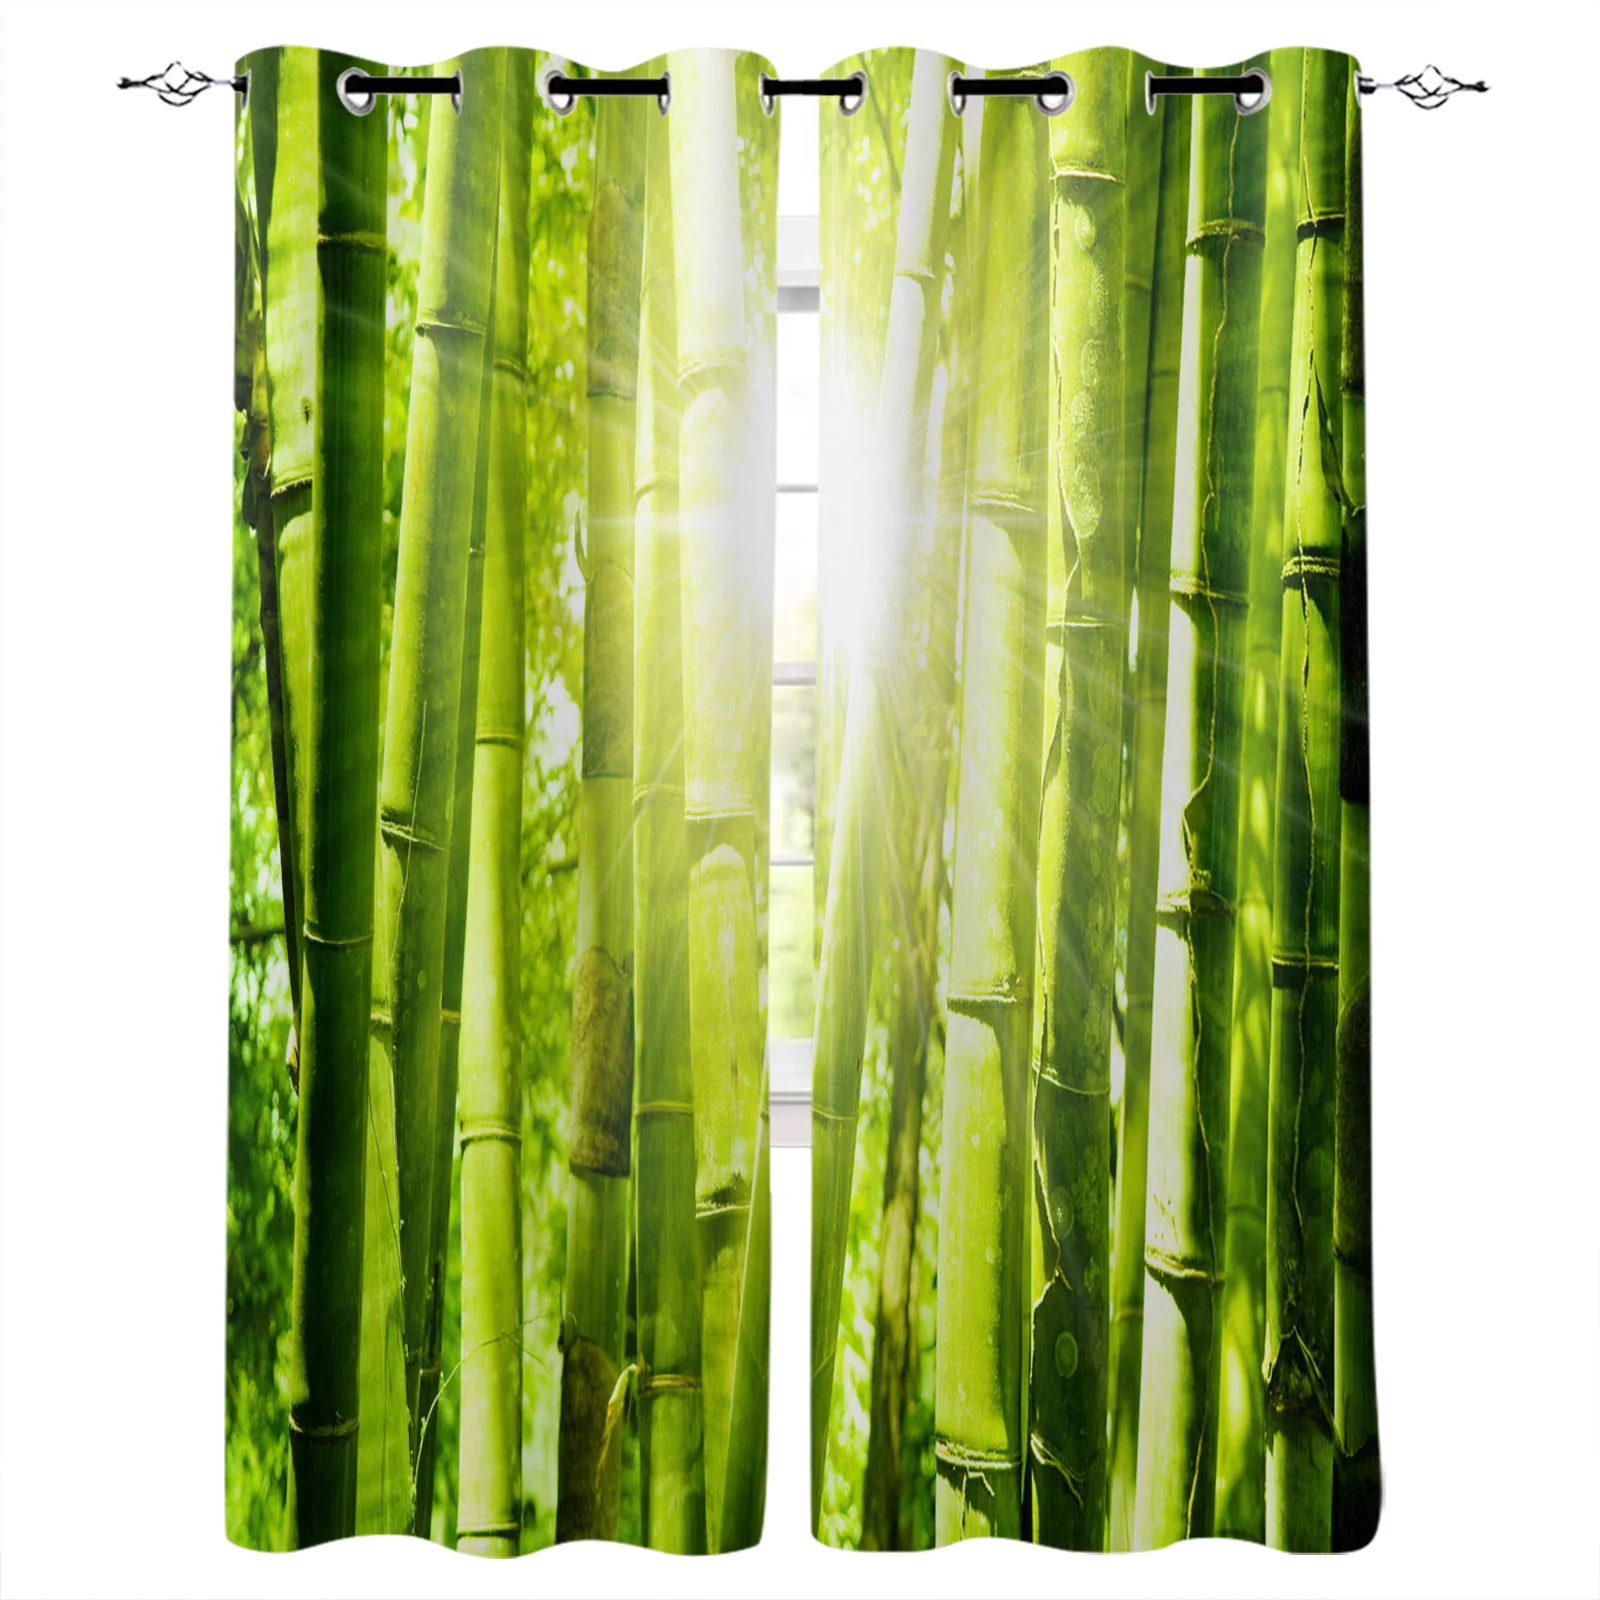 

Bamboo Forest Sunlight Green Plants Blackout Curtains Window Curtains for Bedroom Living Room Decor Window Treatments